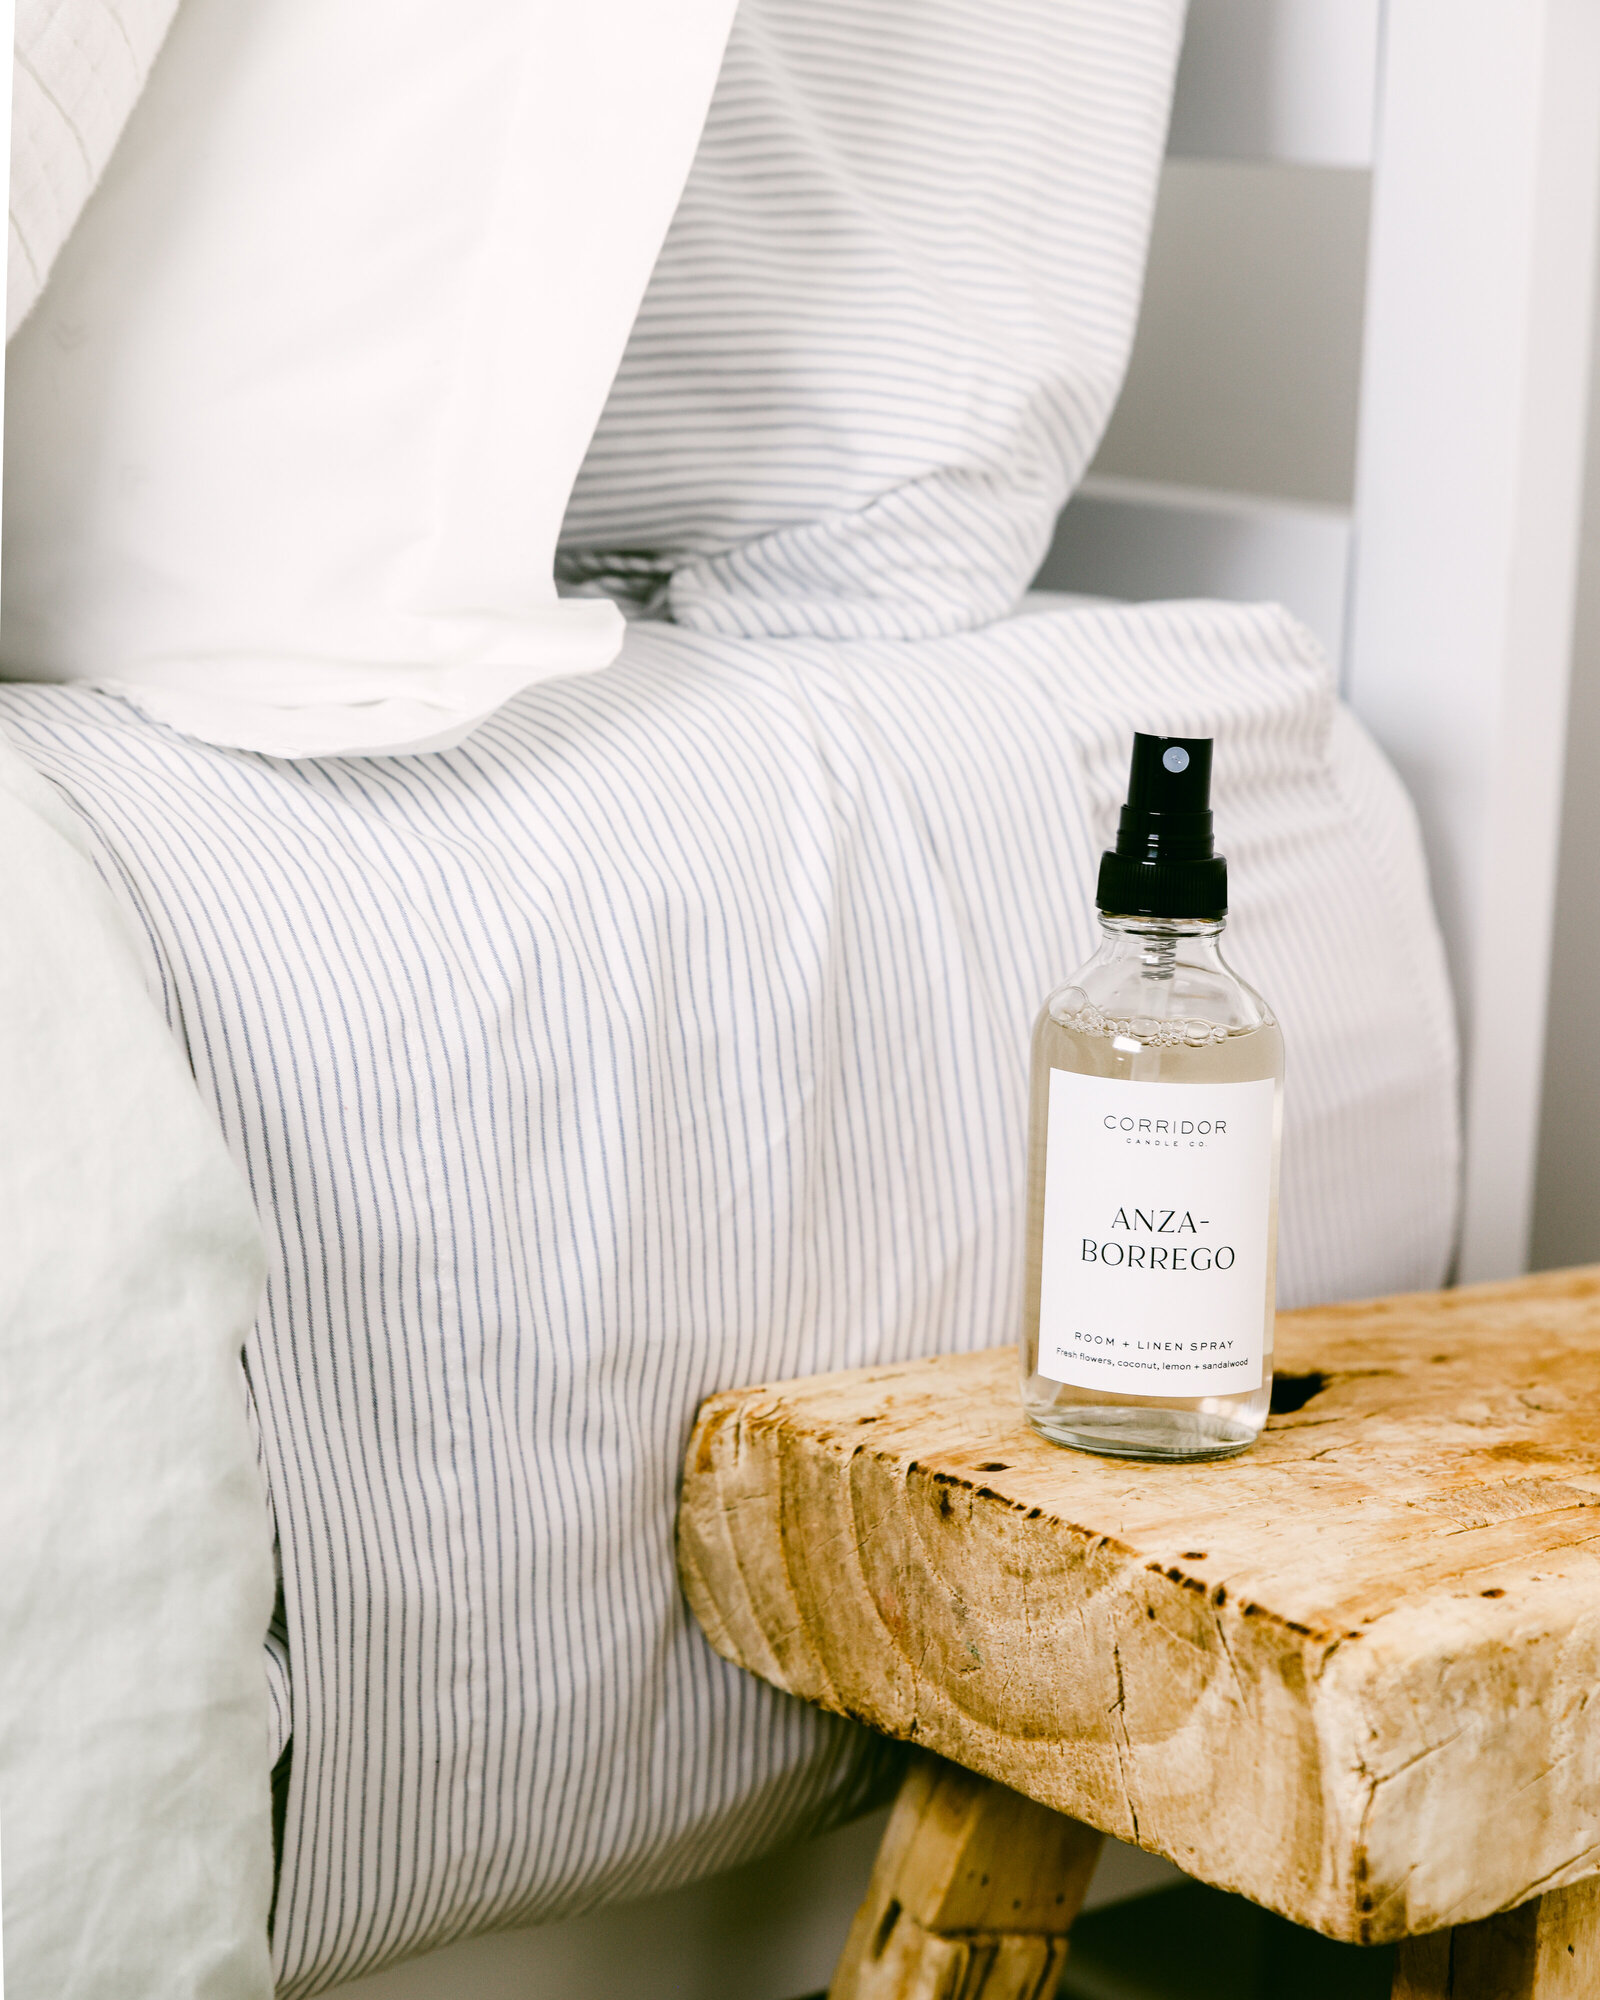 Room spray next to striped bedding rustic bench California product photoshoot